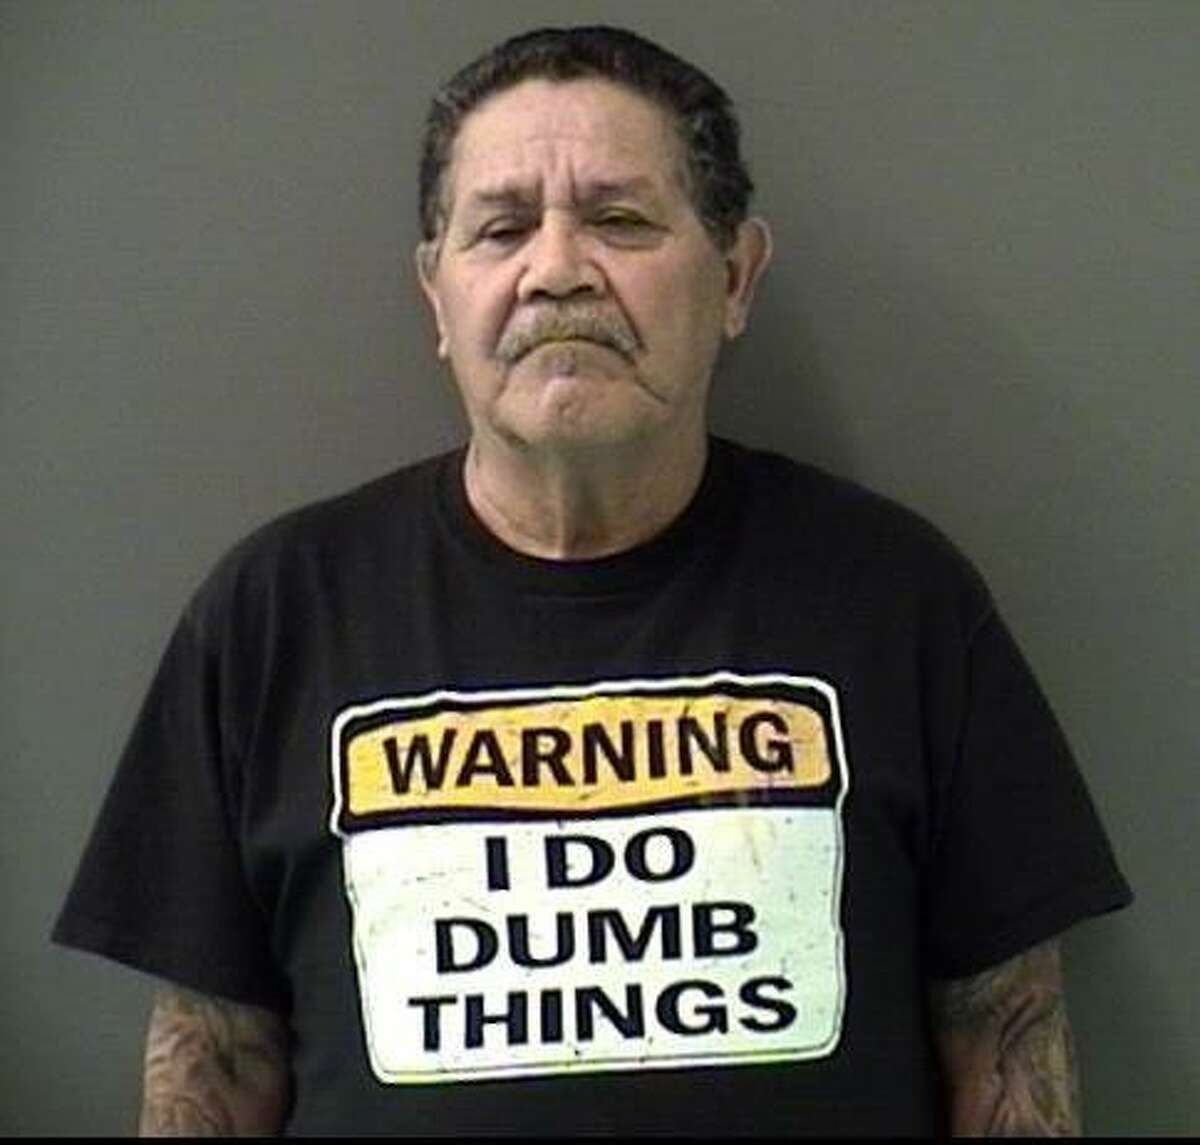 Luciano Gutierrez, 66, was booked into Bell County Jail on Feb. 26, 2015, on his ninth driving while intoxicated charge while wearing a shirt that read, "Warning: I Do Dumb Things."